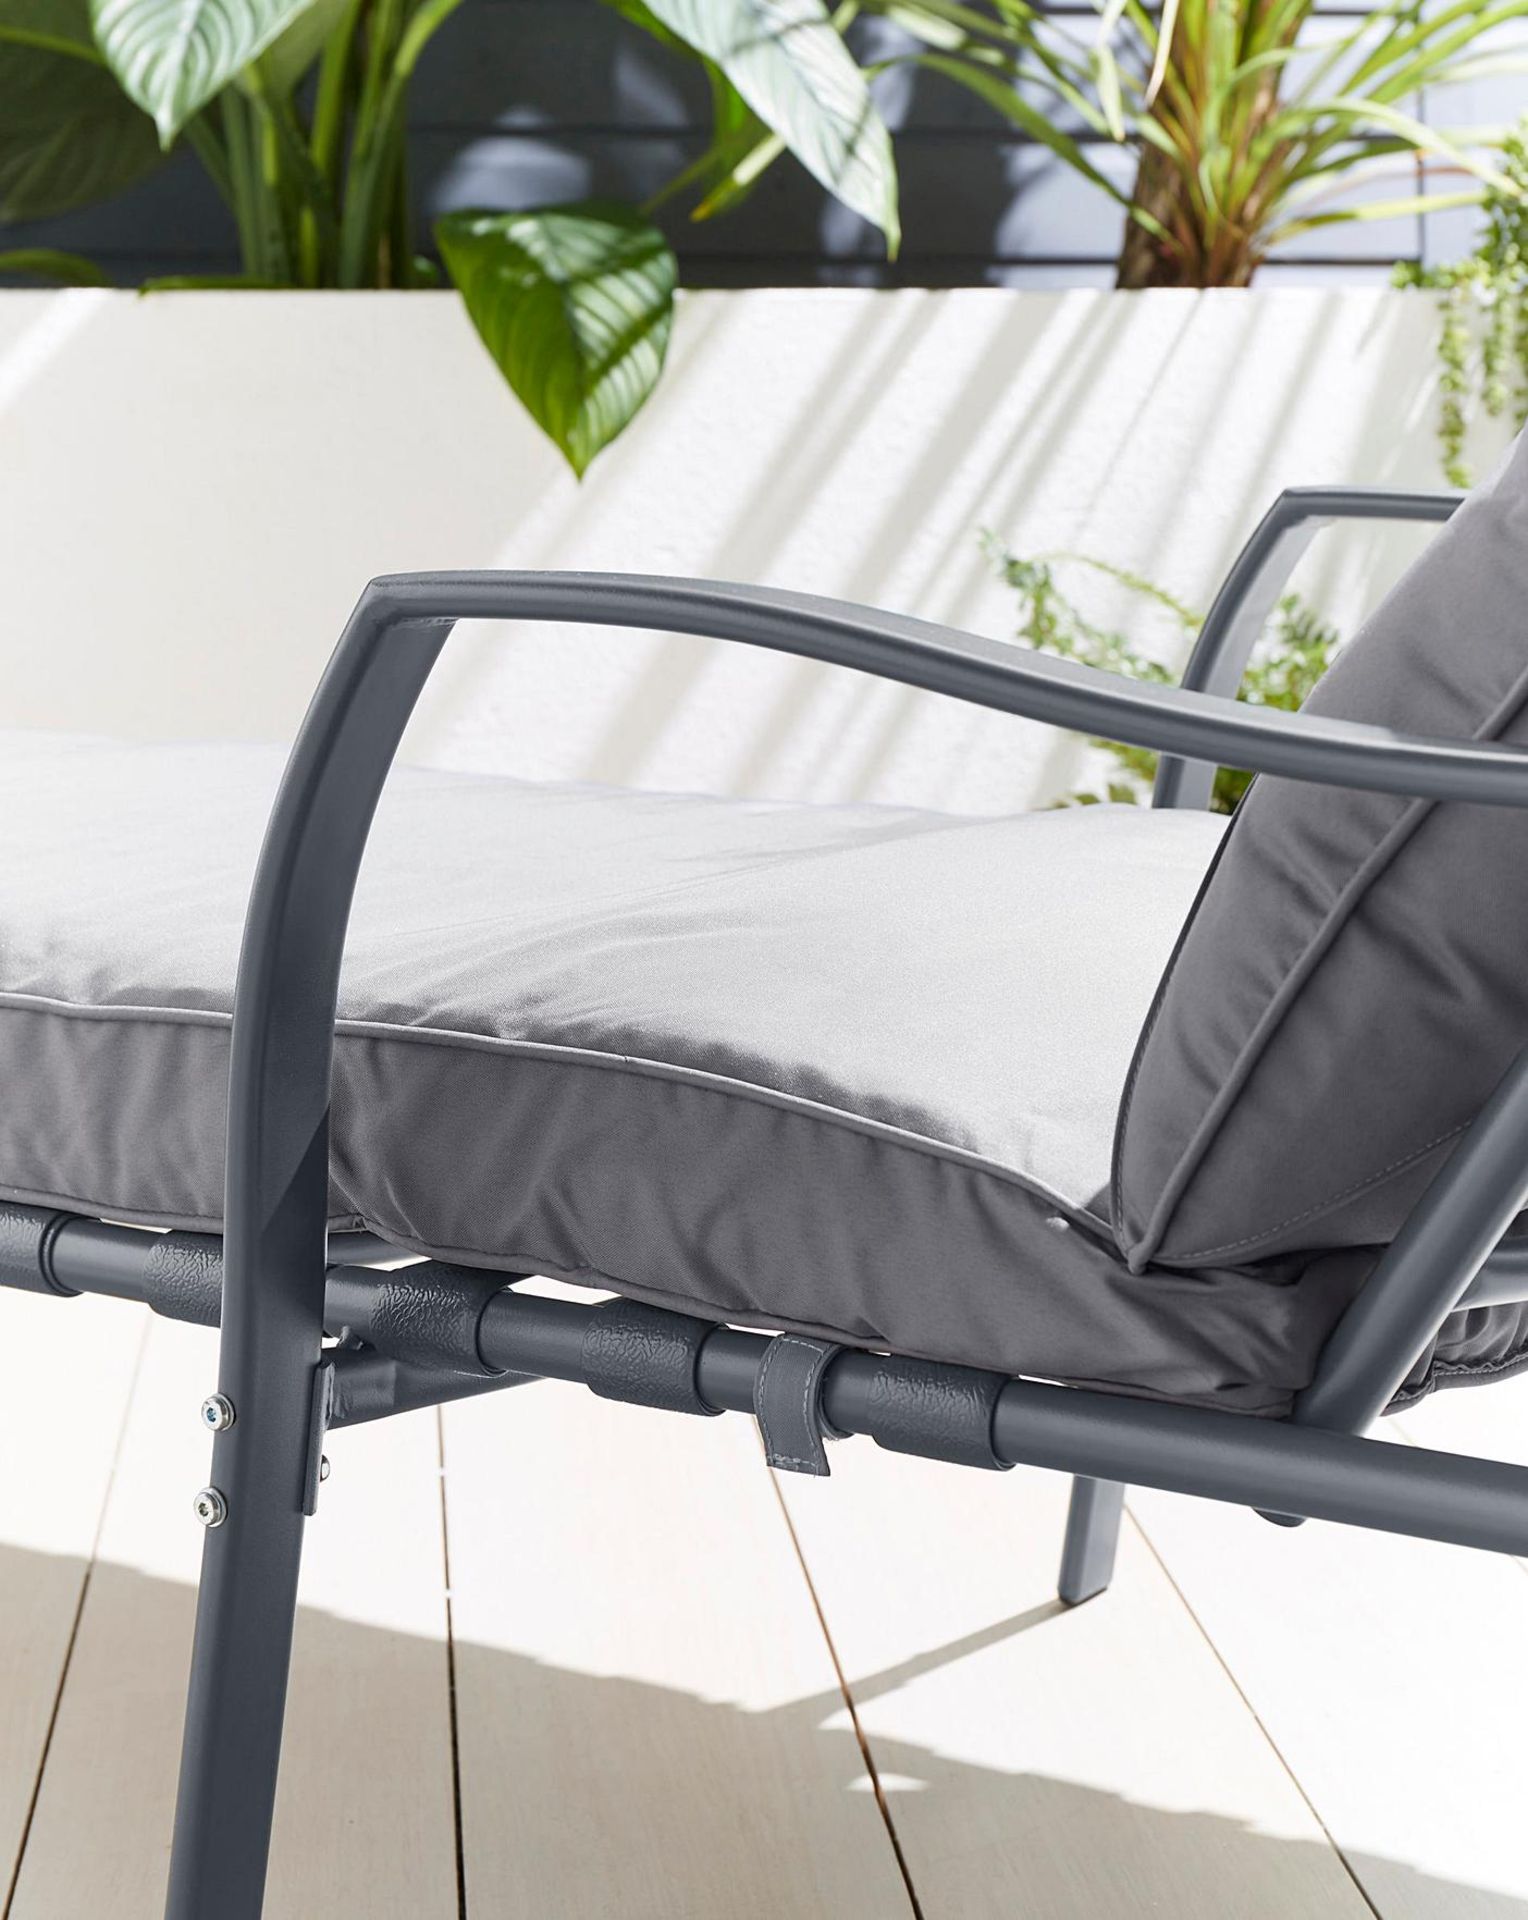 Brand New Luxury Siena Lounger. RRP £199 R18.1Siena lounger is durable and weather resistant.store - Image 3 of 4